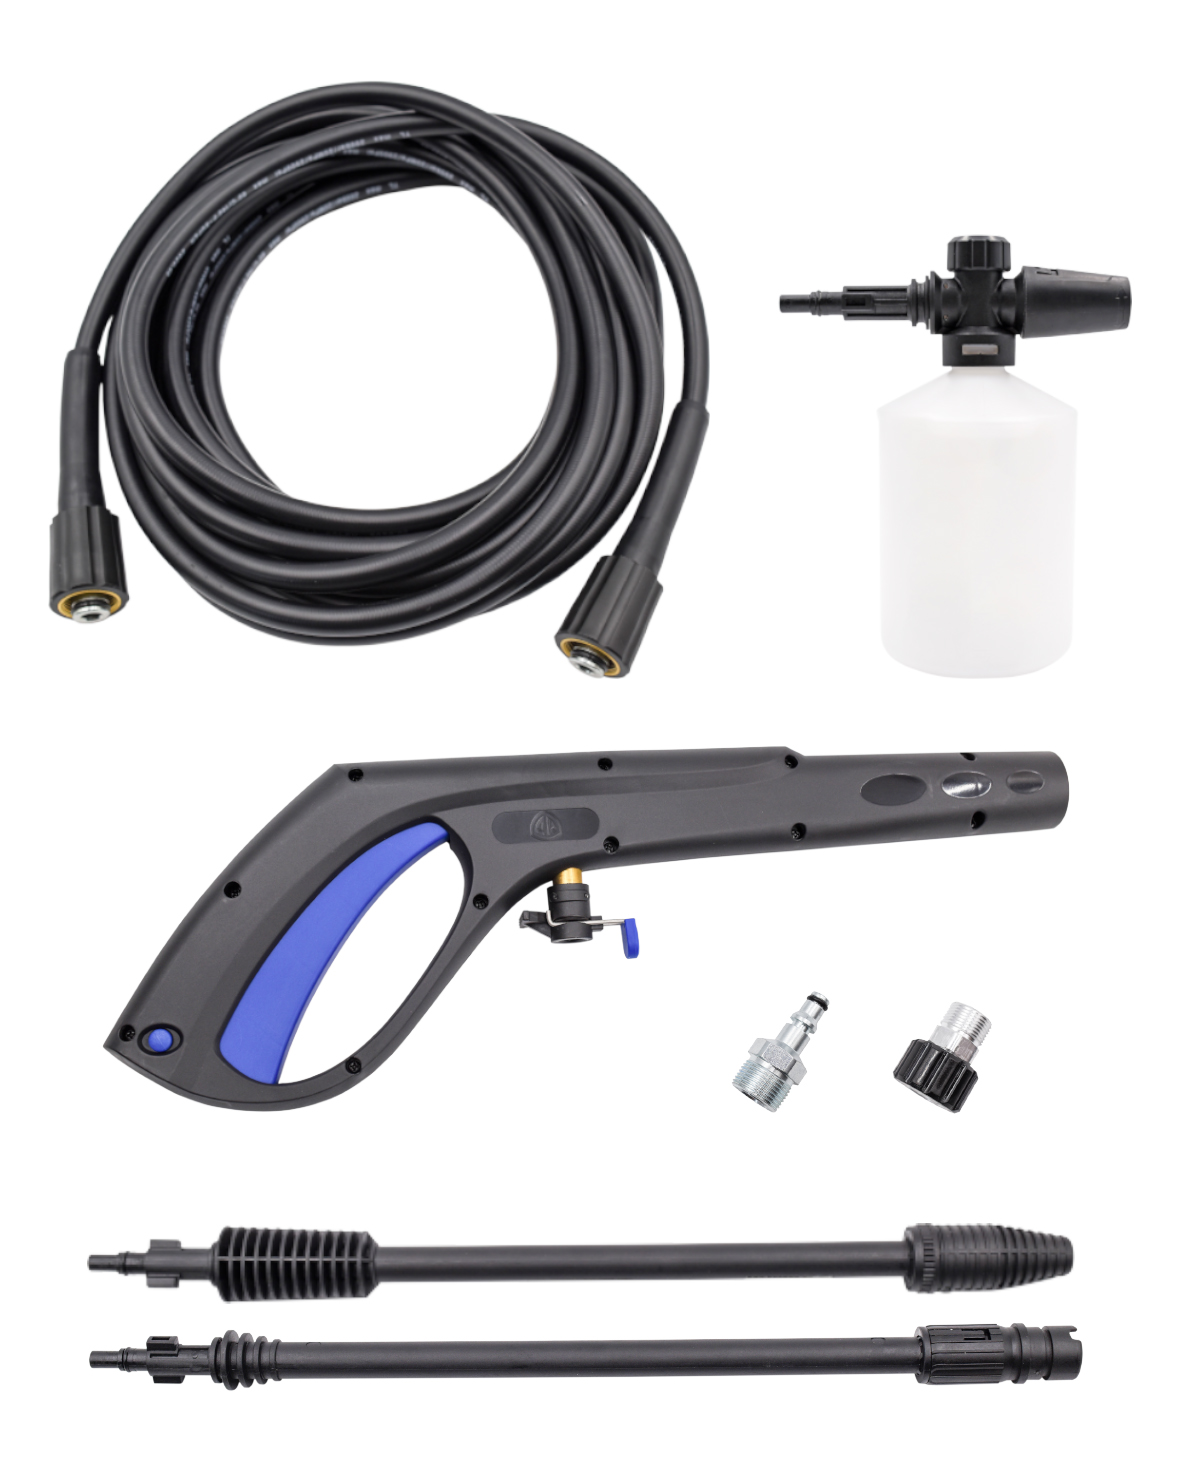 will this replace the spray gun and pressure hose for the AR 383 that I purchased 10 years ago?